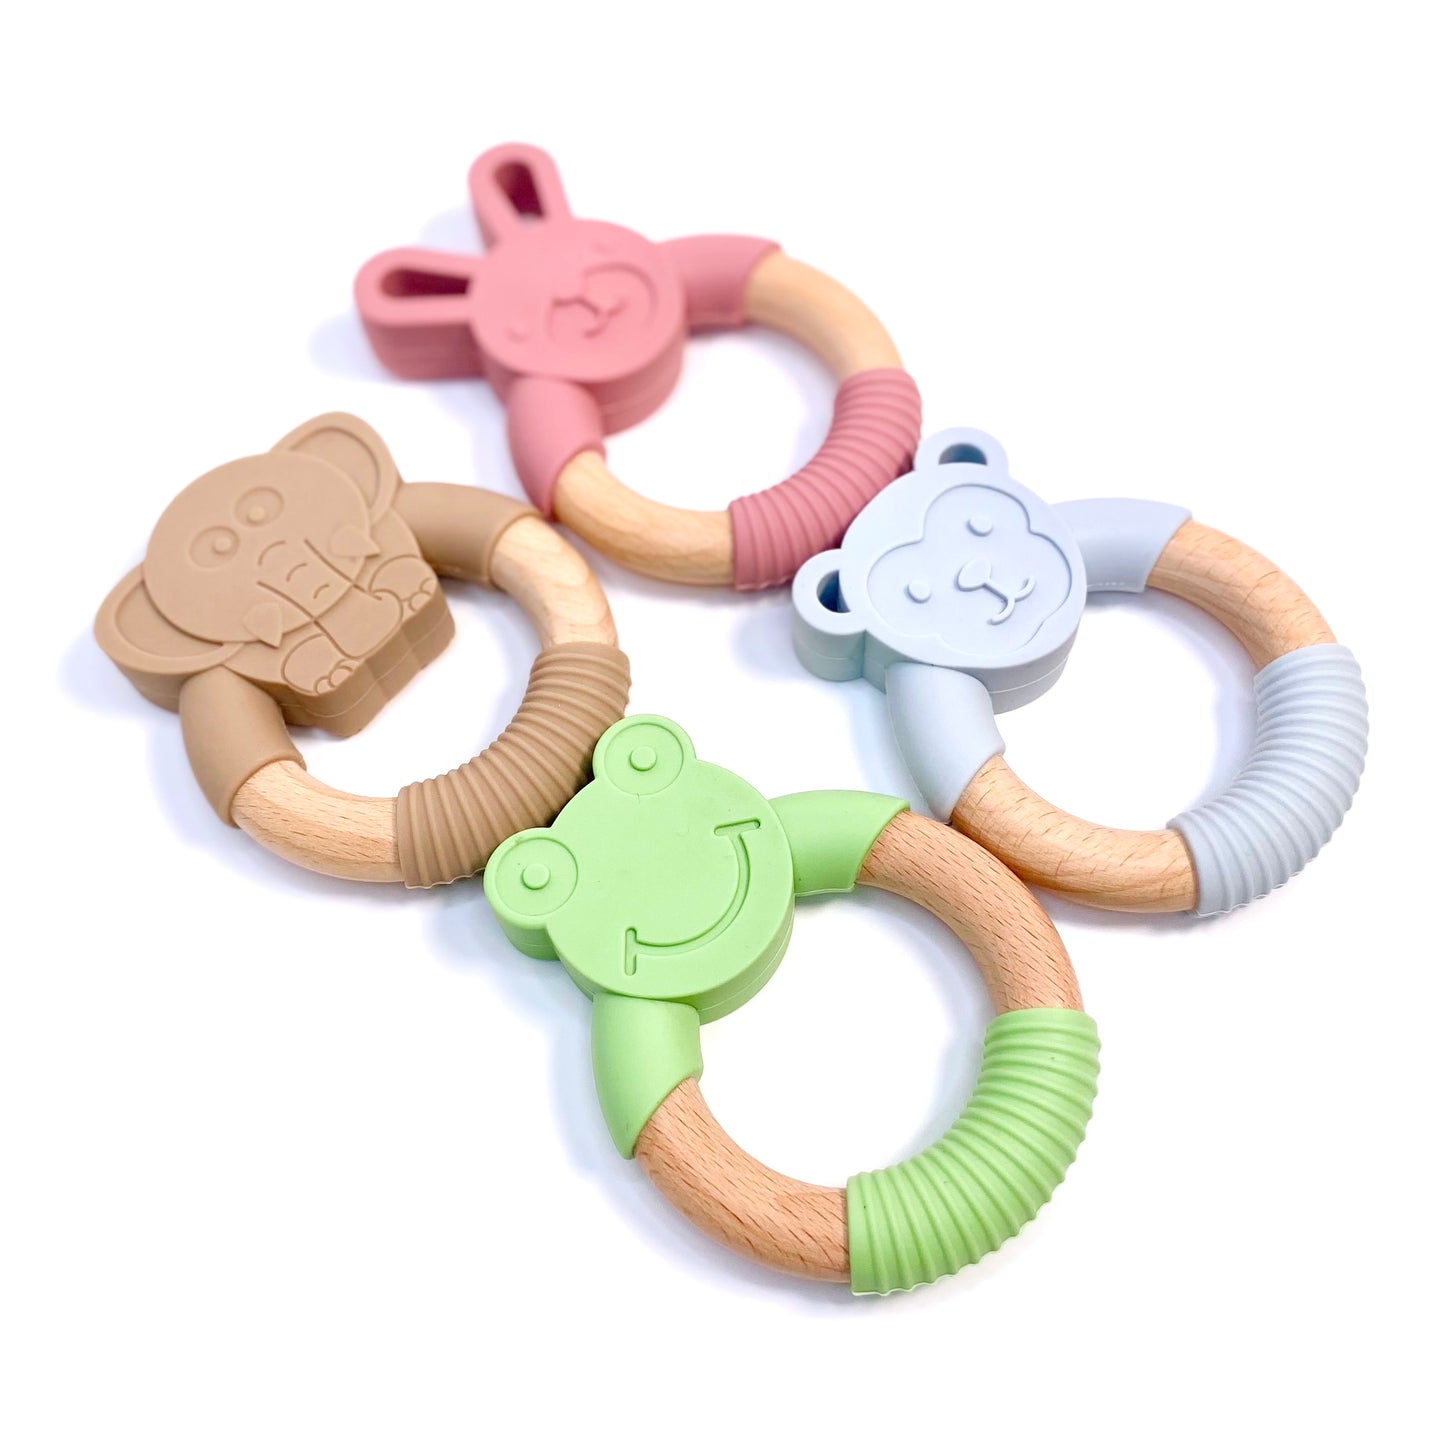 Teething rings made of silicone and bamboo, in elephant, monkey, rabbit and frog designs.